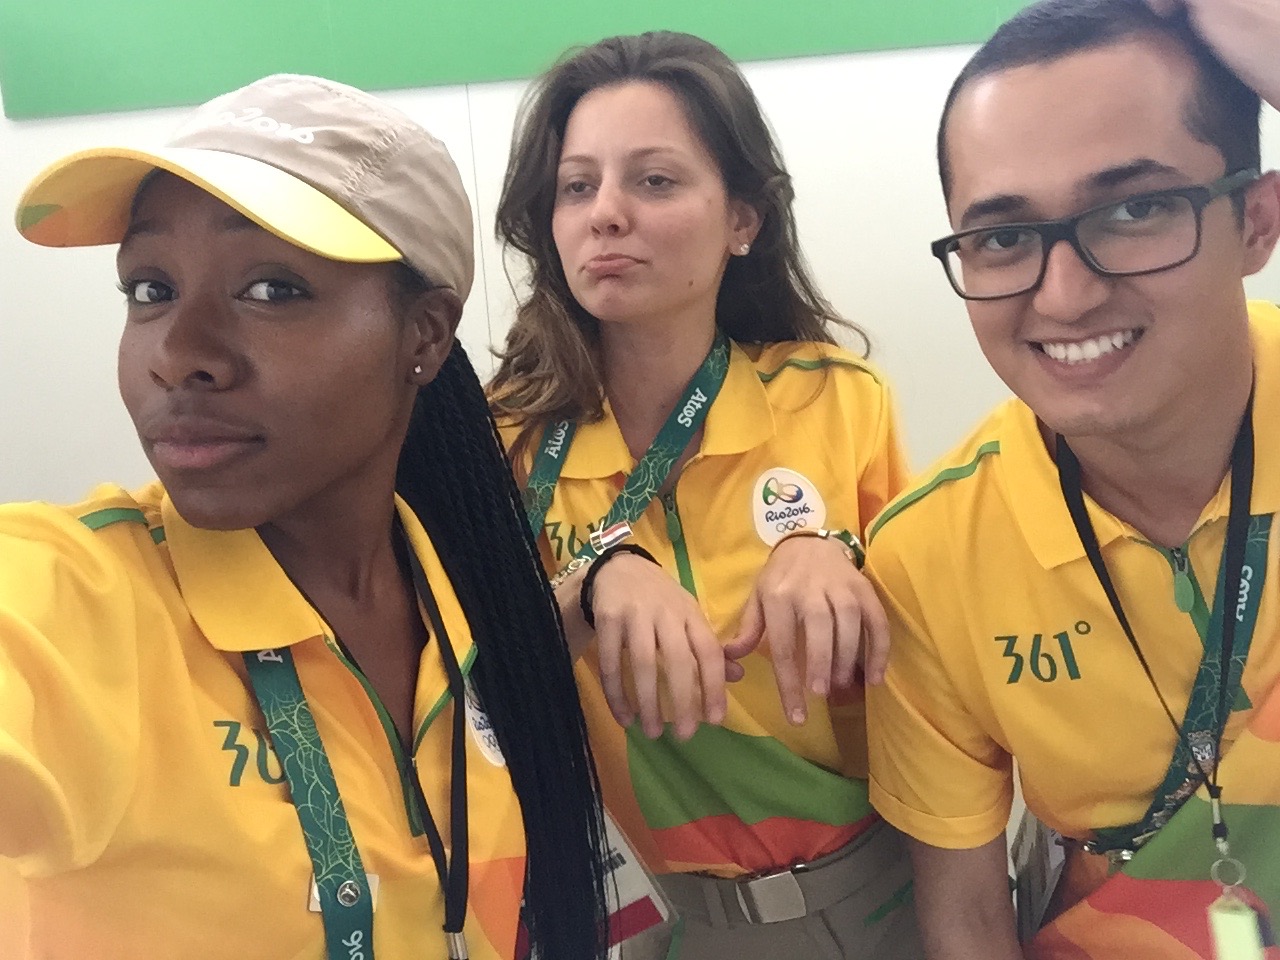 How to Volunteer at the Olympics and My Experience Volunteering in Rio